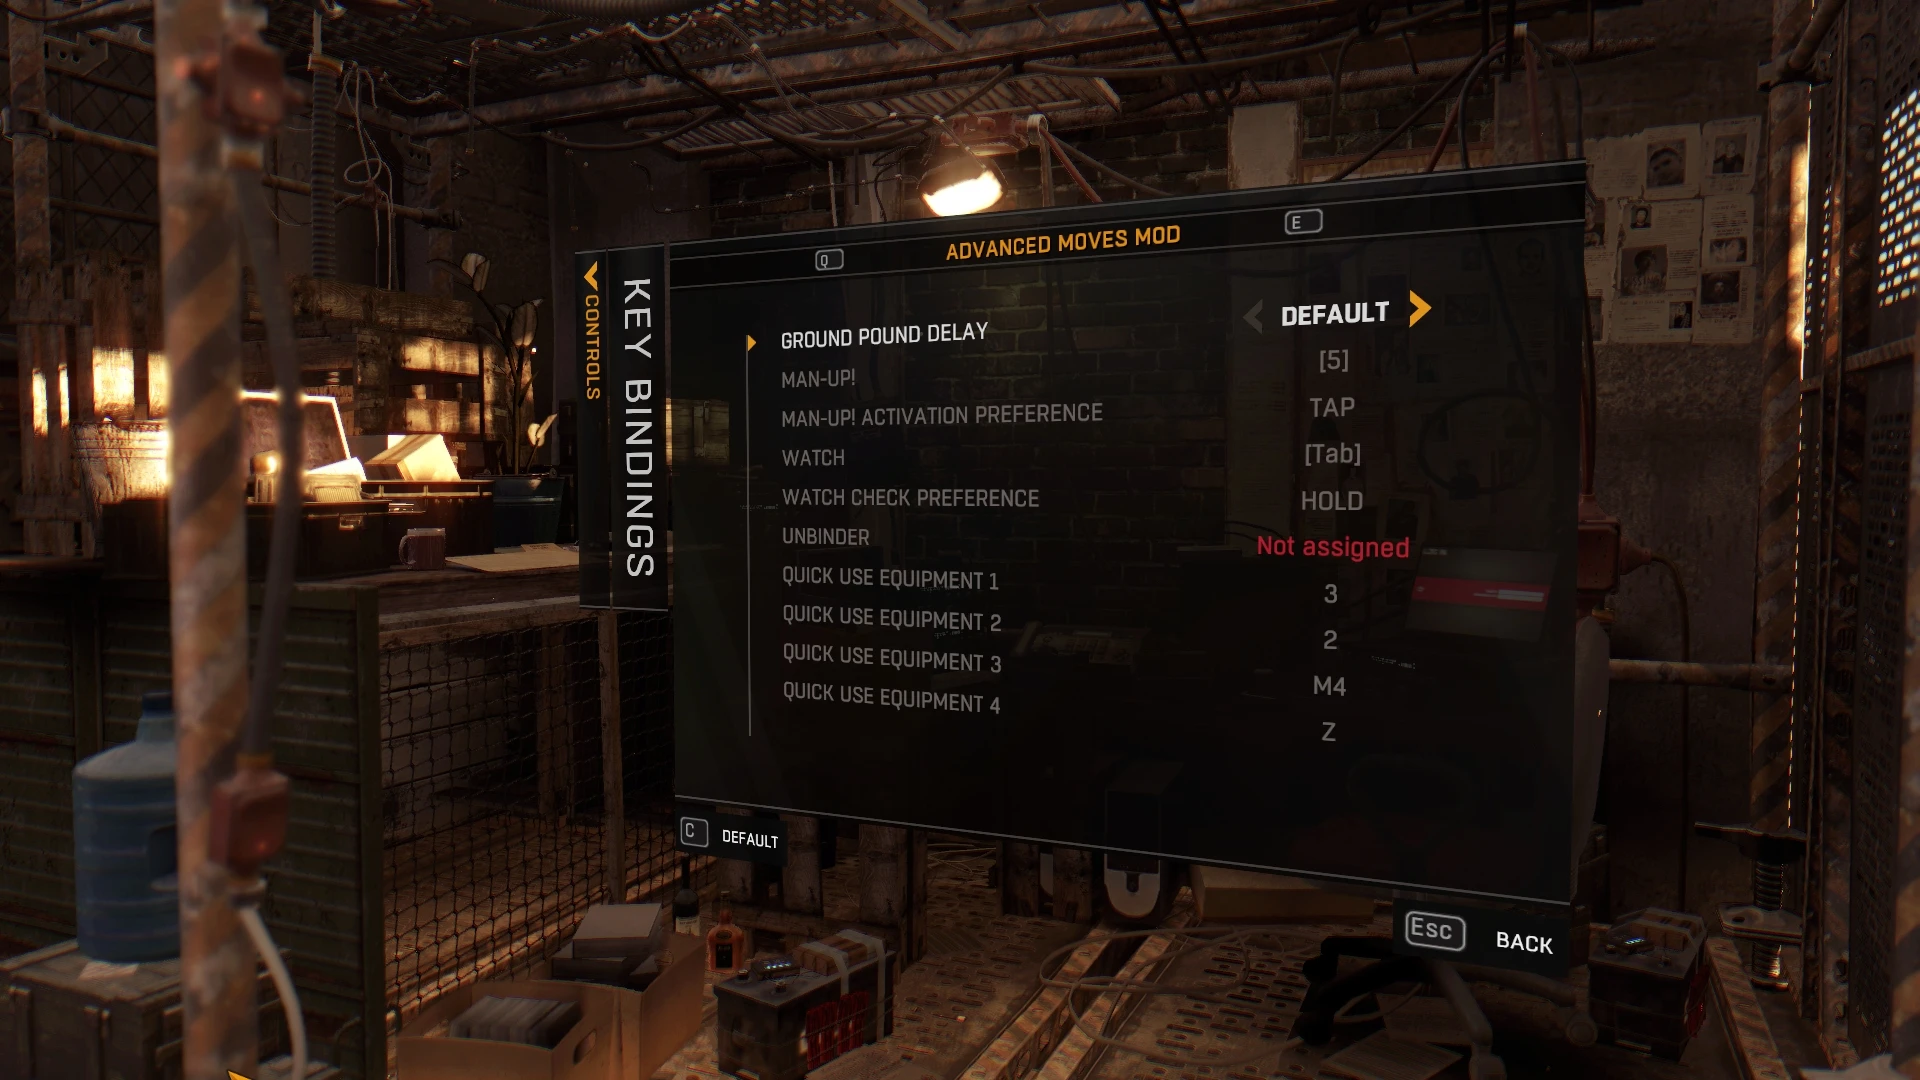 dying light mods unlimited repairs